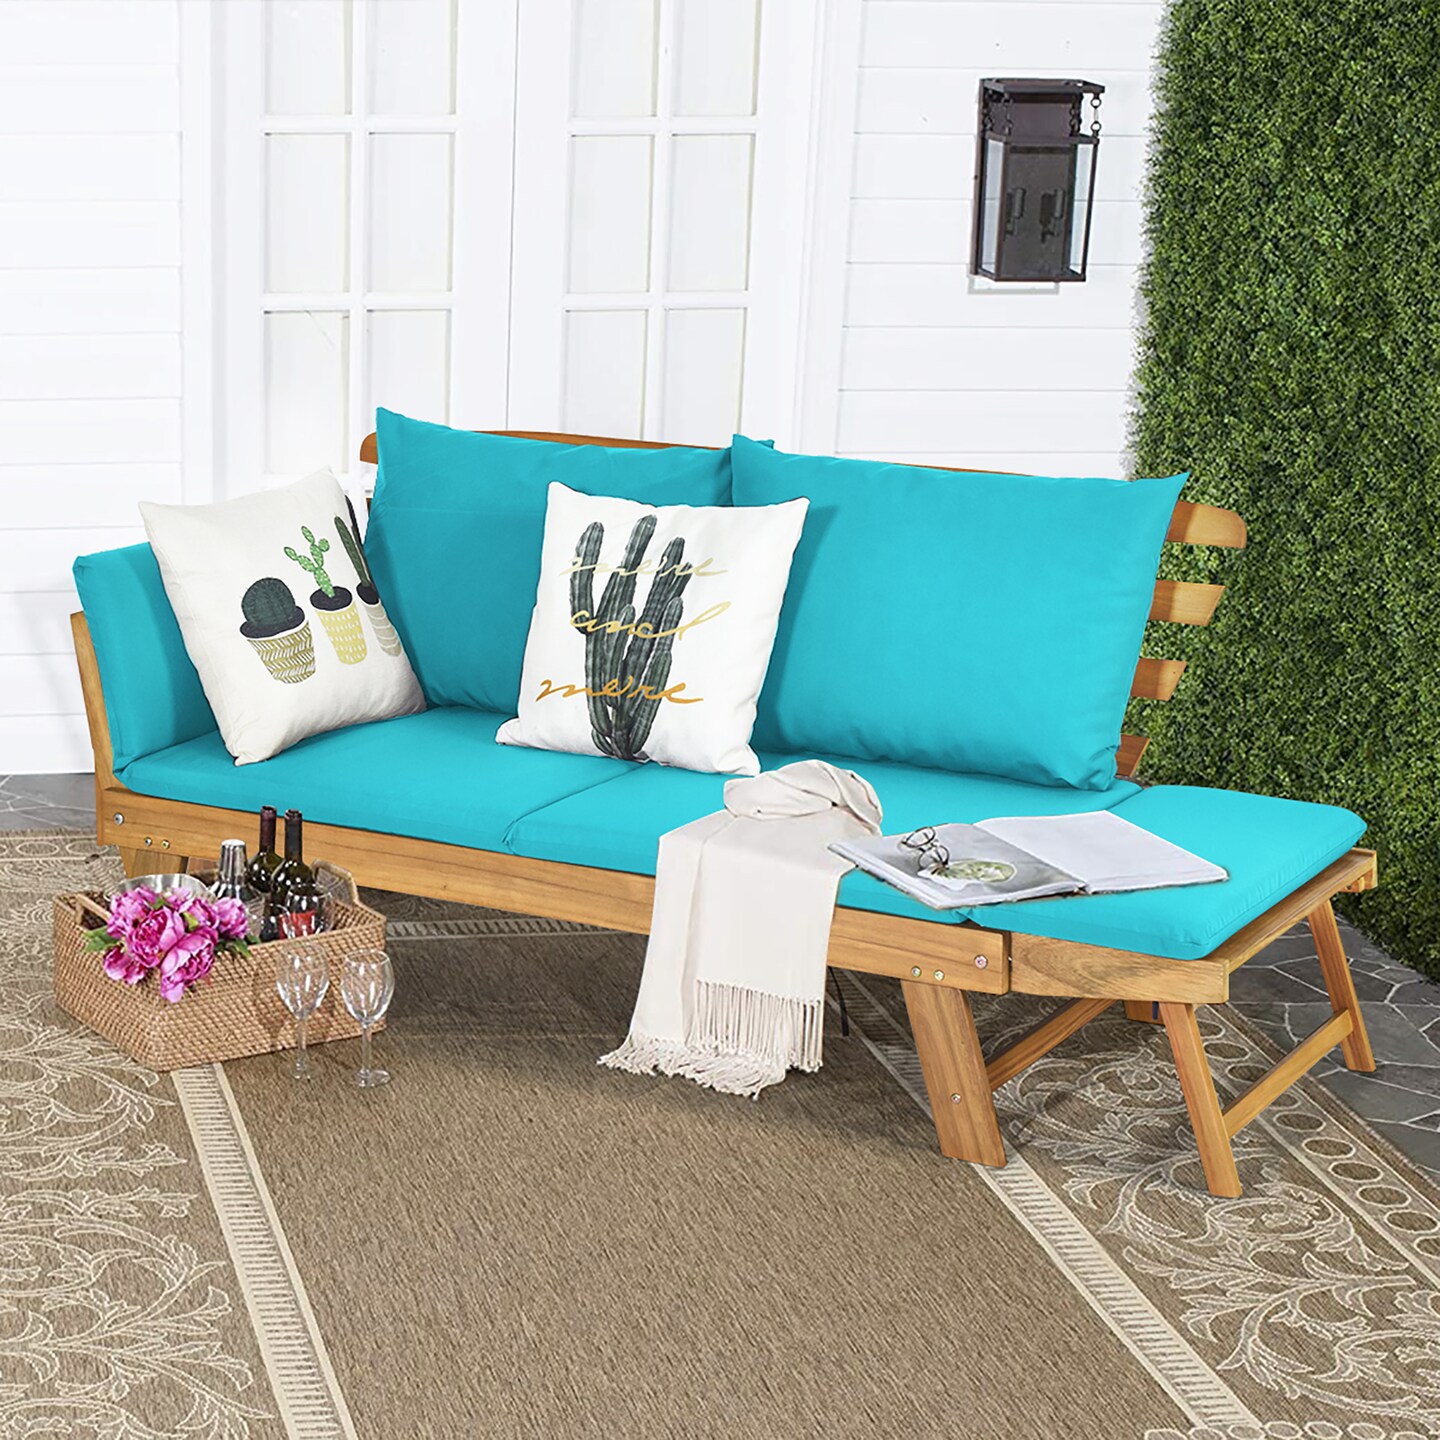 Costway Patio Convertible Sofa Daybed Solid Wood Adjustable Thick Cushion Turquoise\Red\ White